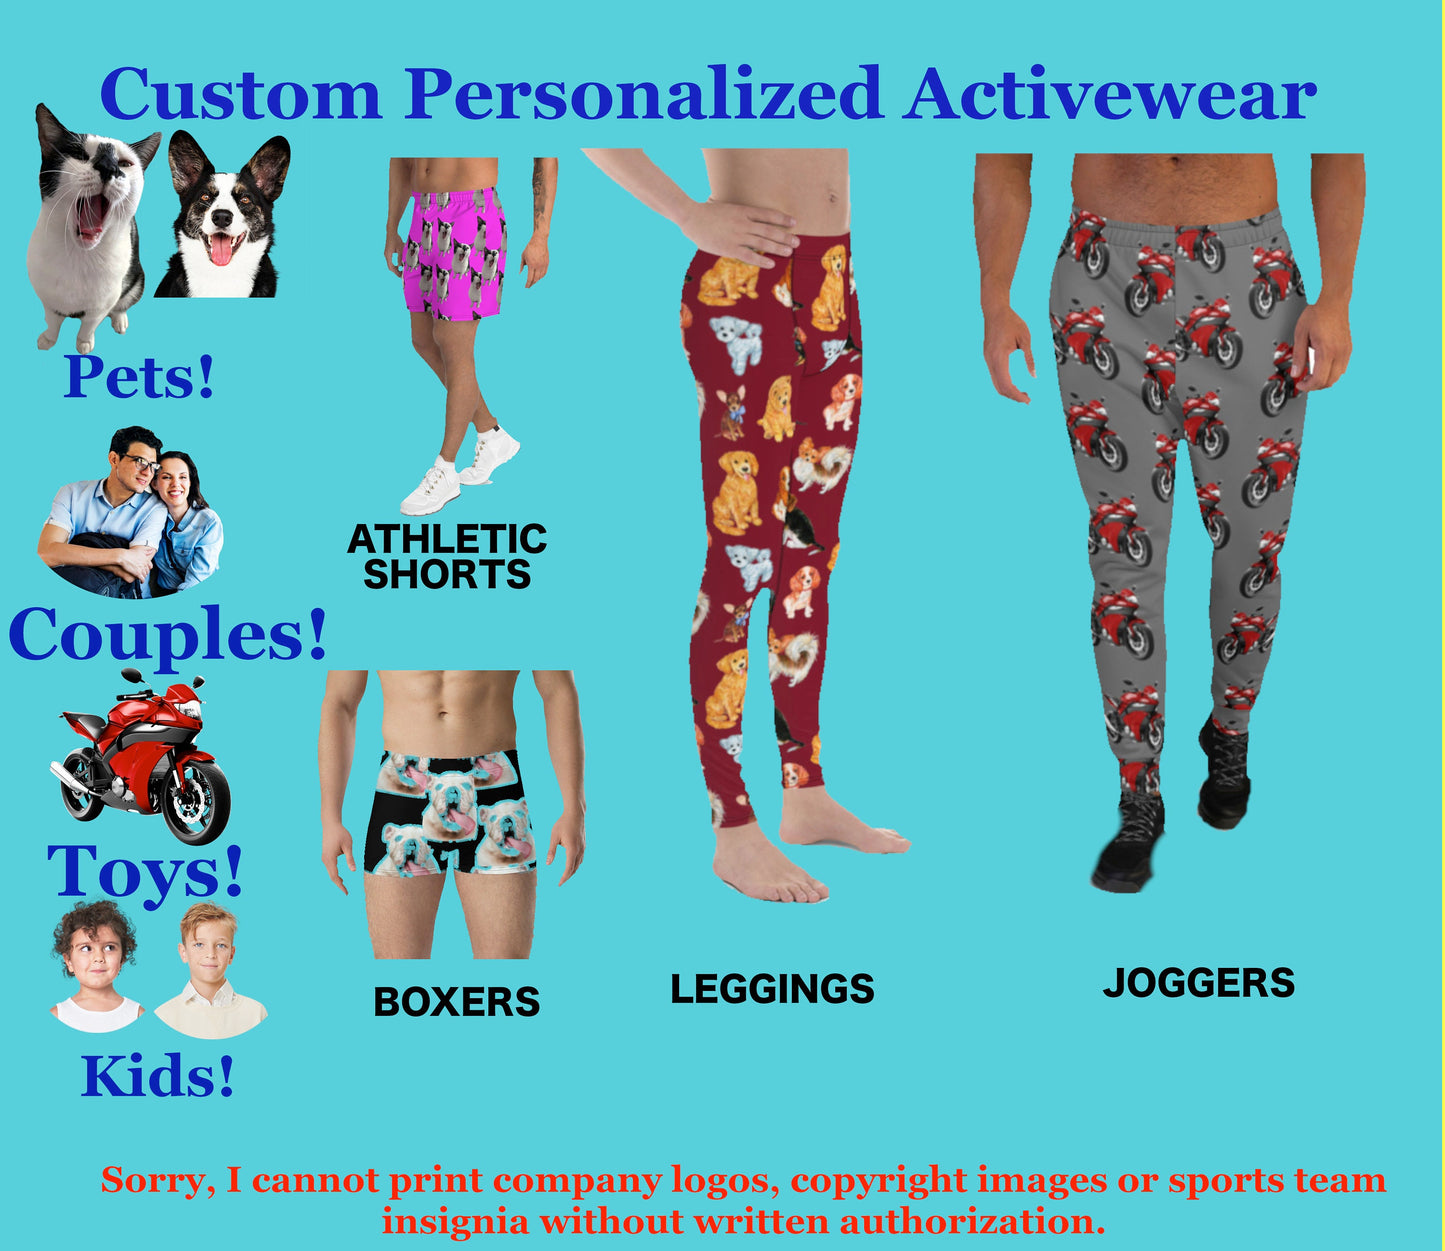 Custom Man Leggings Athletic Workout Activewear Photo Meggings Personalized Gift Pants Men Shorts Gym Running Birthday Party Sexy Bottoms